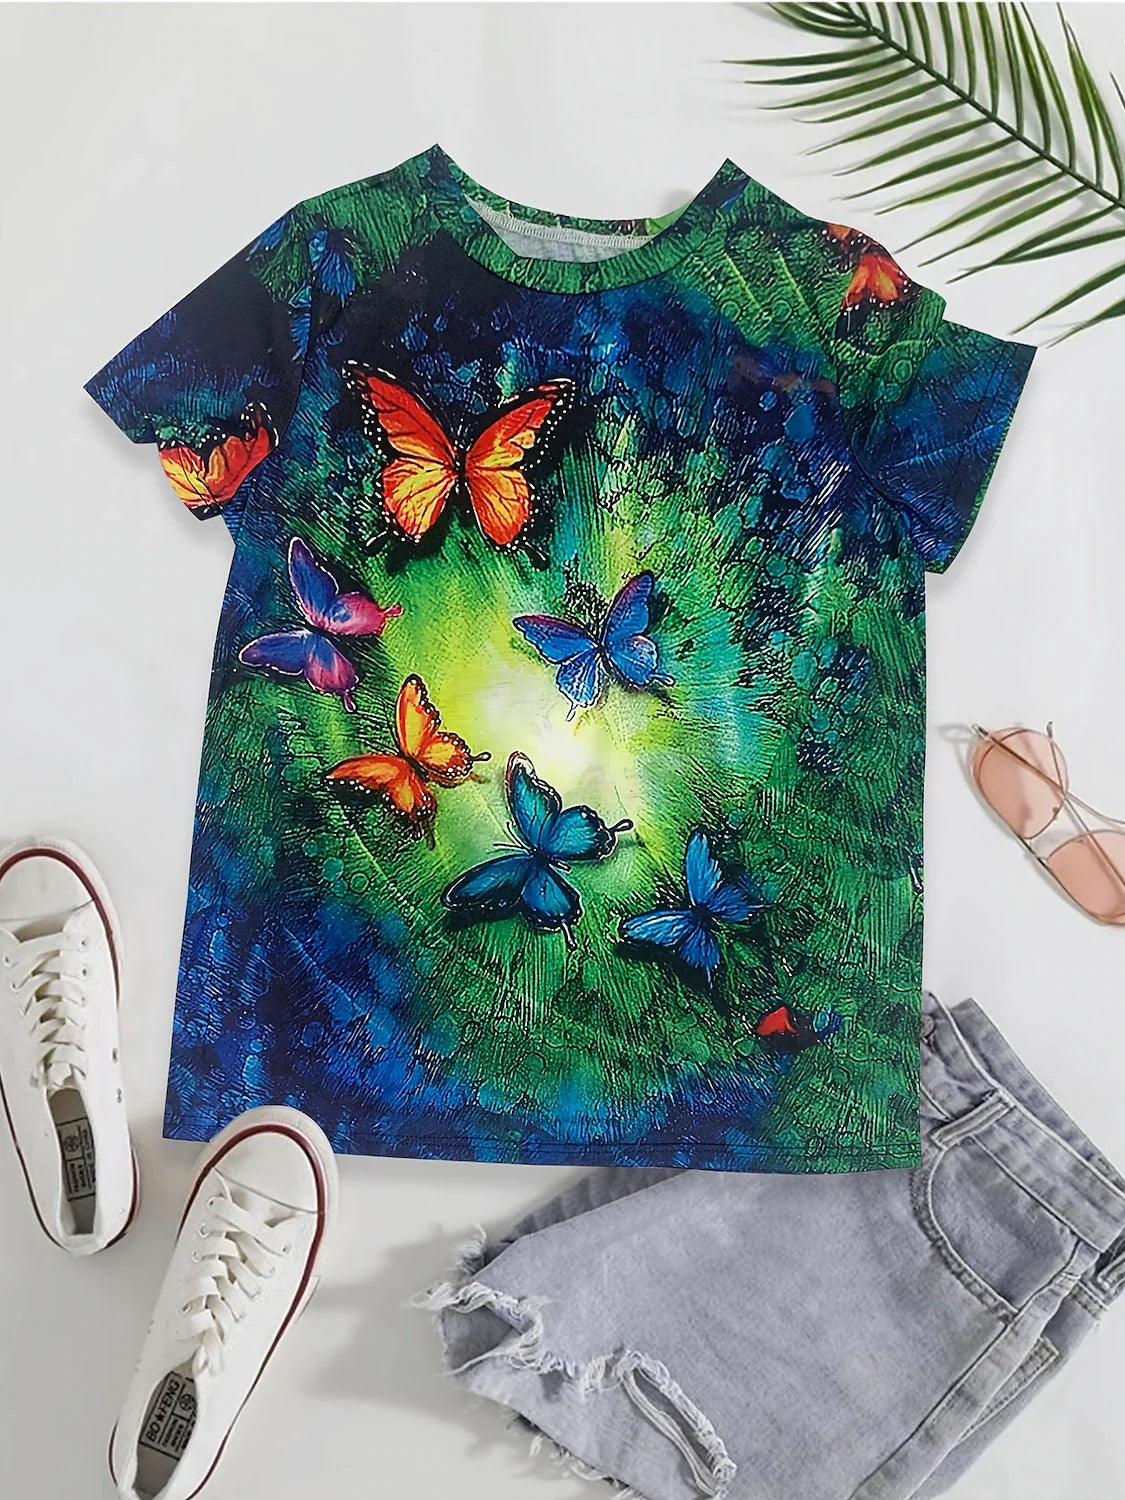 Women's T shirt Tee Graphic Butterfly Blue Print Short Sleeve Daily Weekend Basic Round Neck Regular Fit